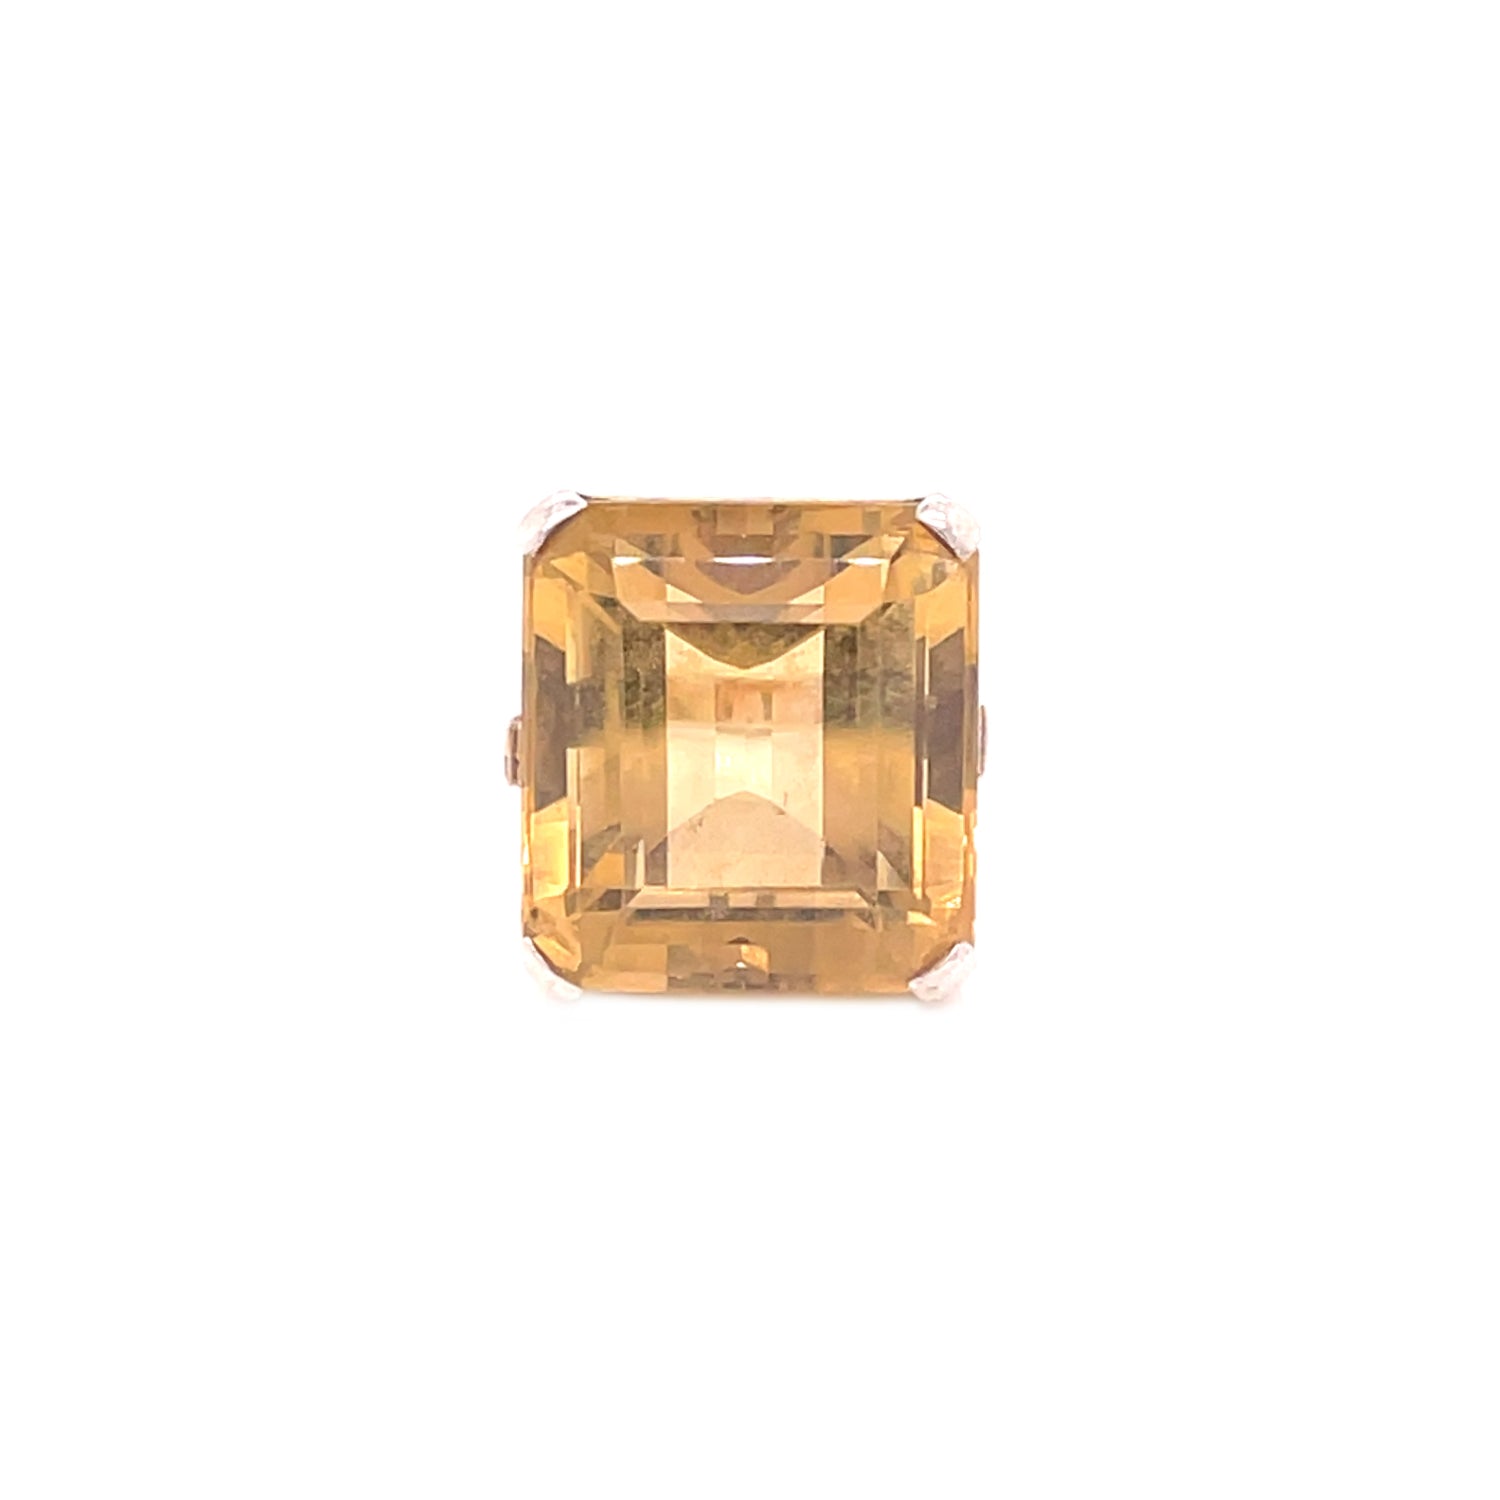 Gorgeous golden-yellow gemstone with an emerald cut on display.